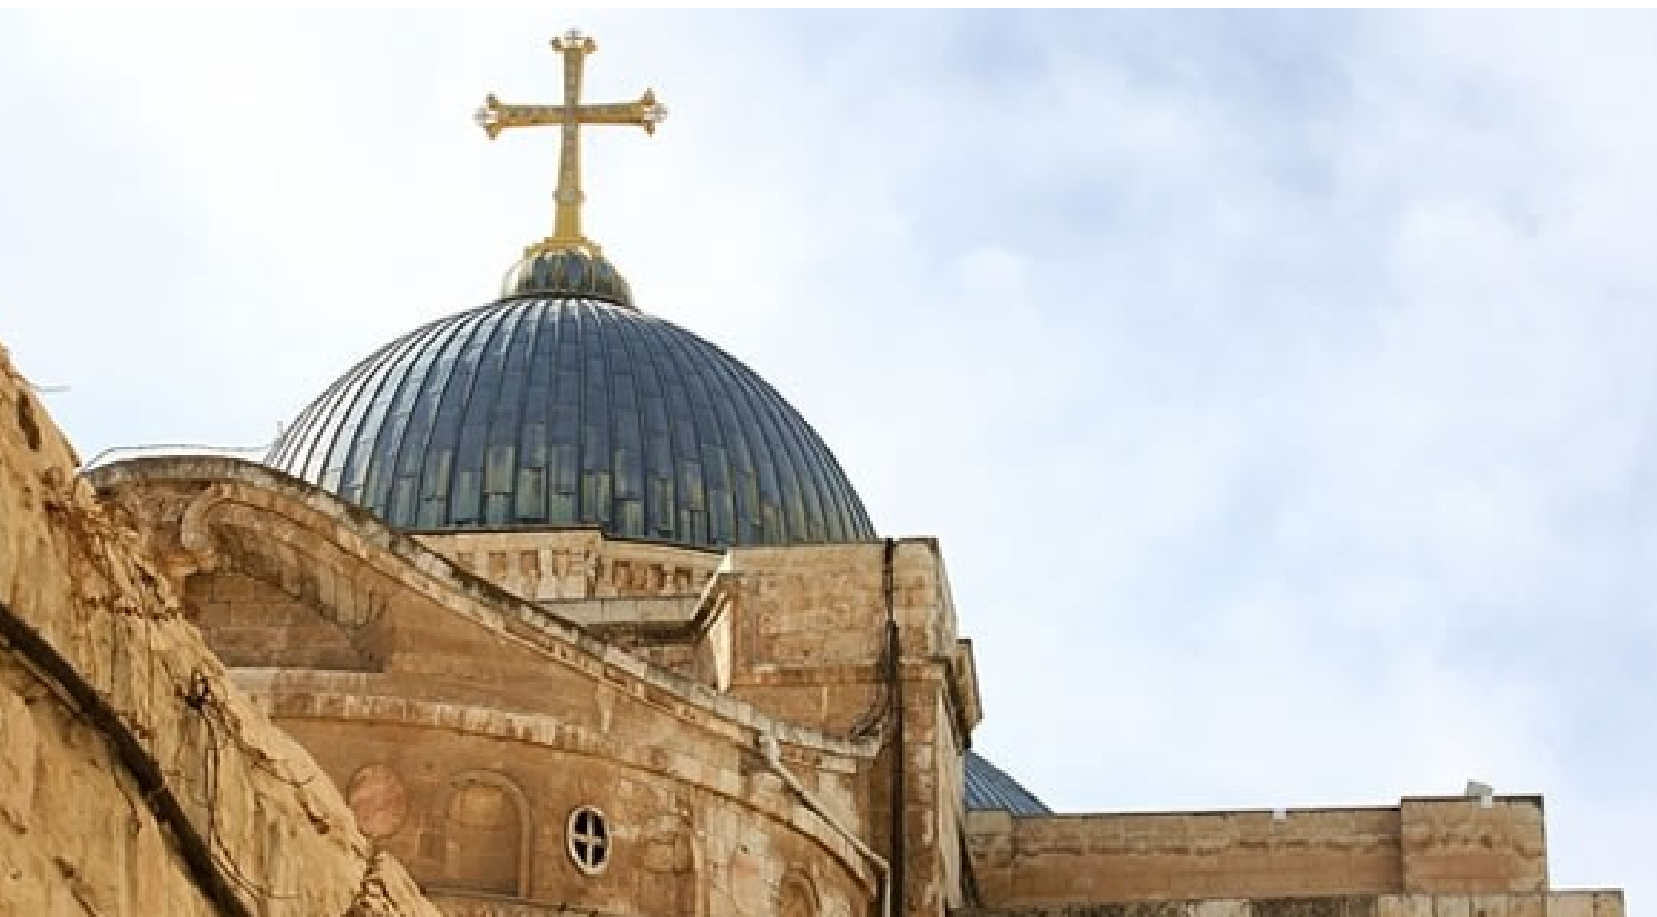 The church leaders argue these measures aim to reduce the Christian presence in the Holy Land deliberately.